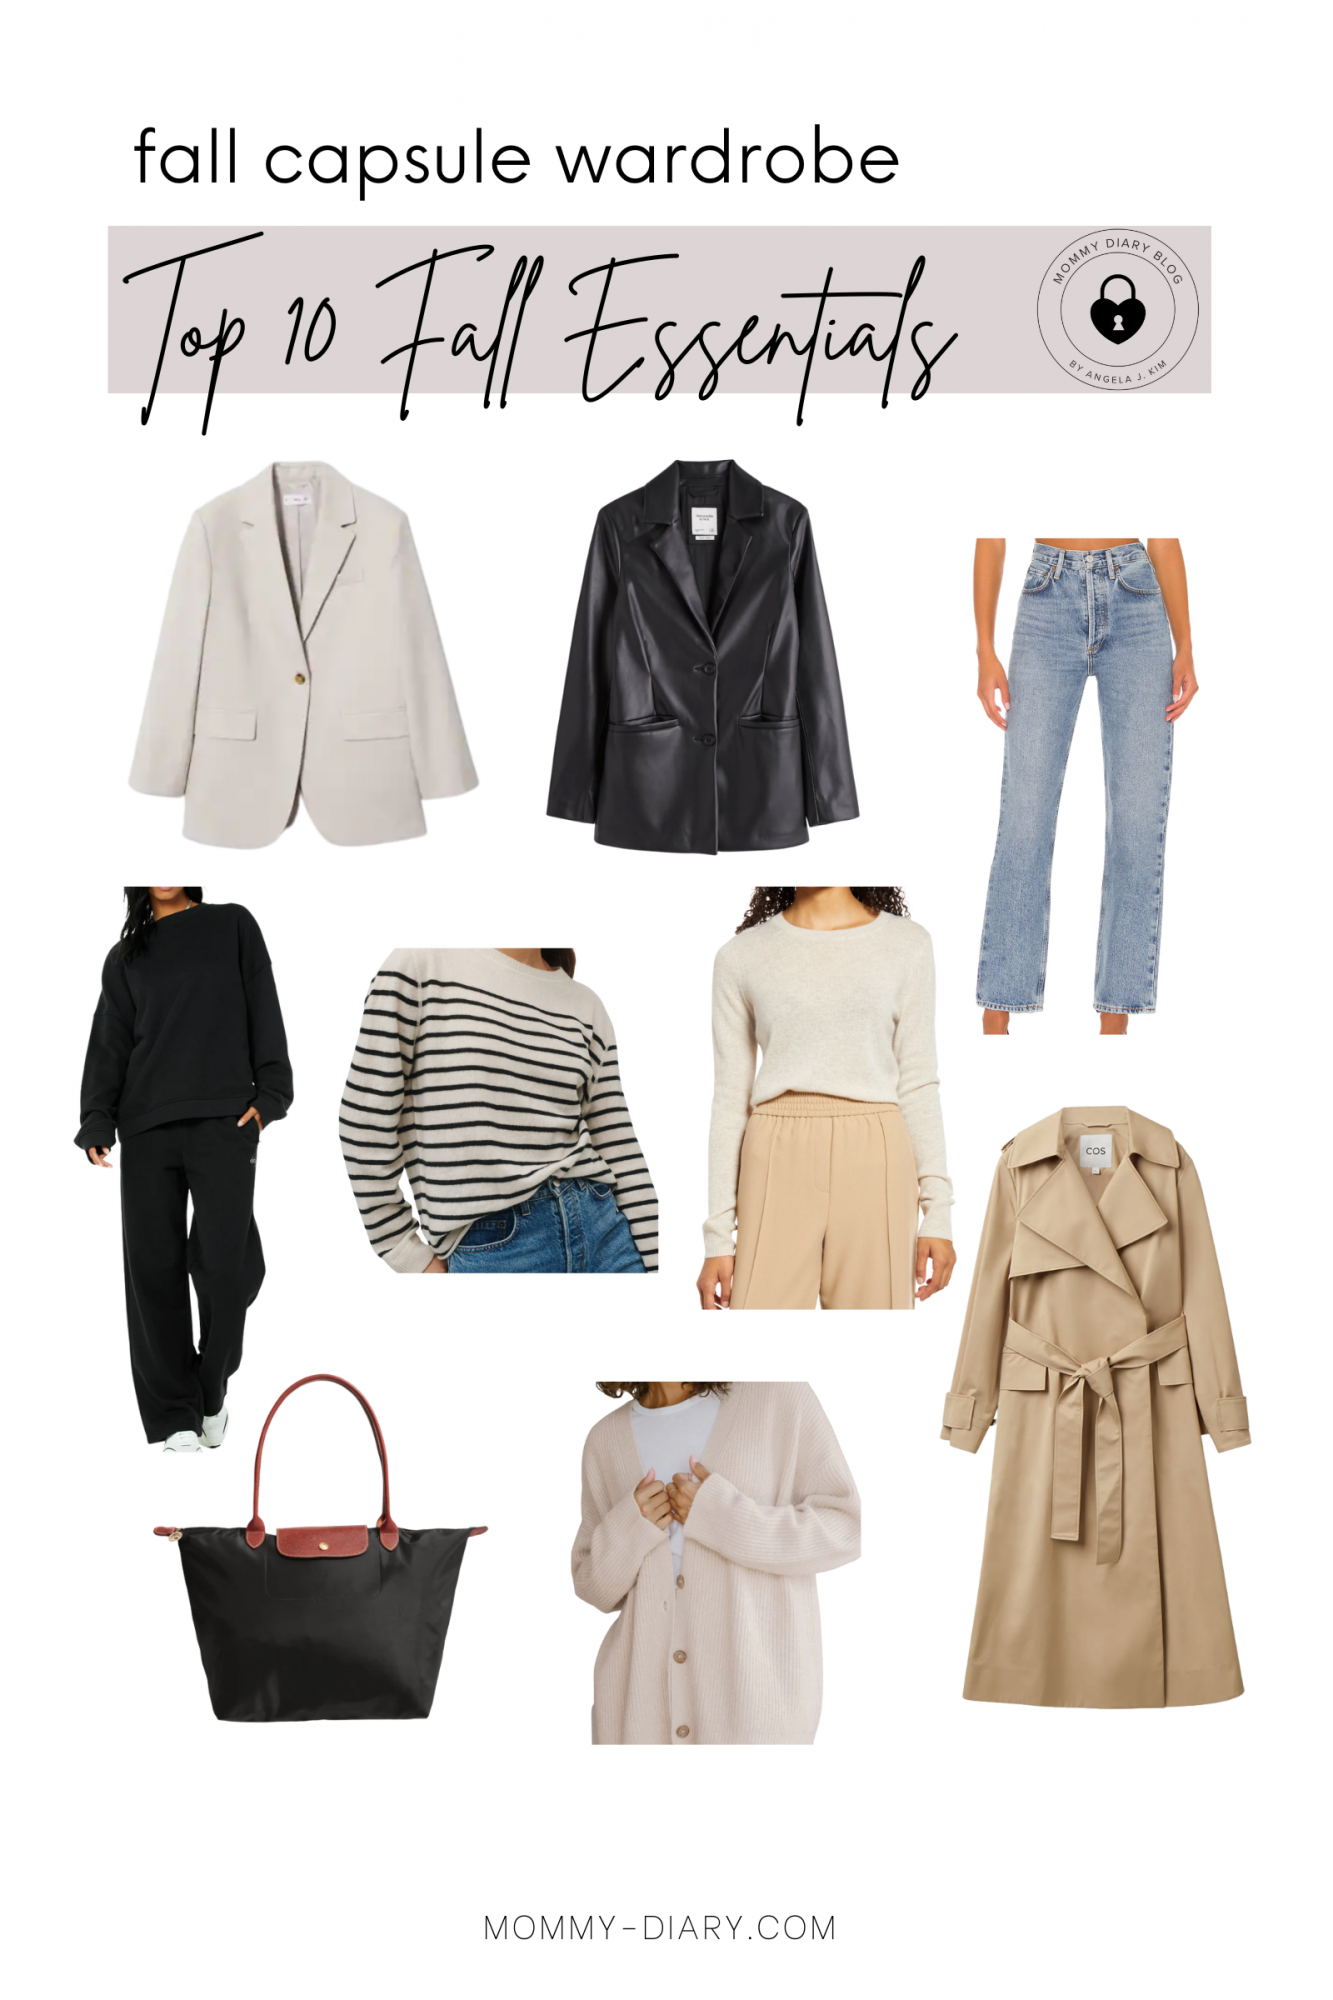 Why You Need a Postpartum Capsule Wardrobe